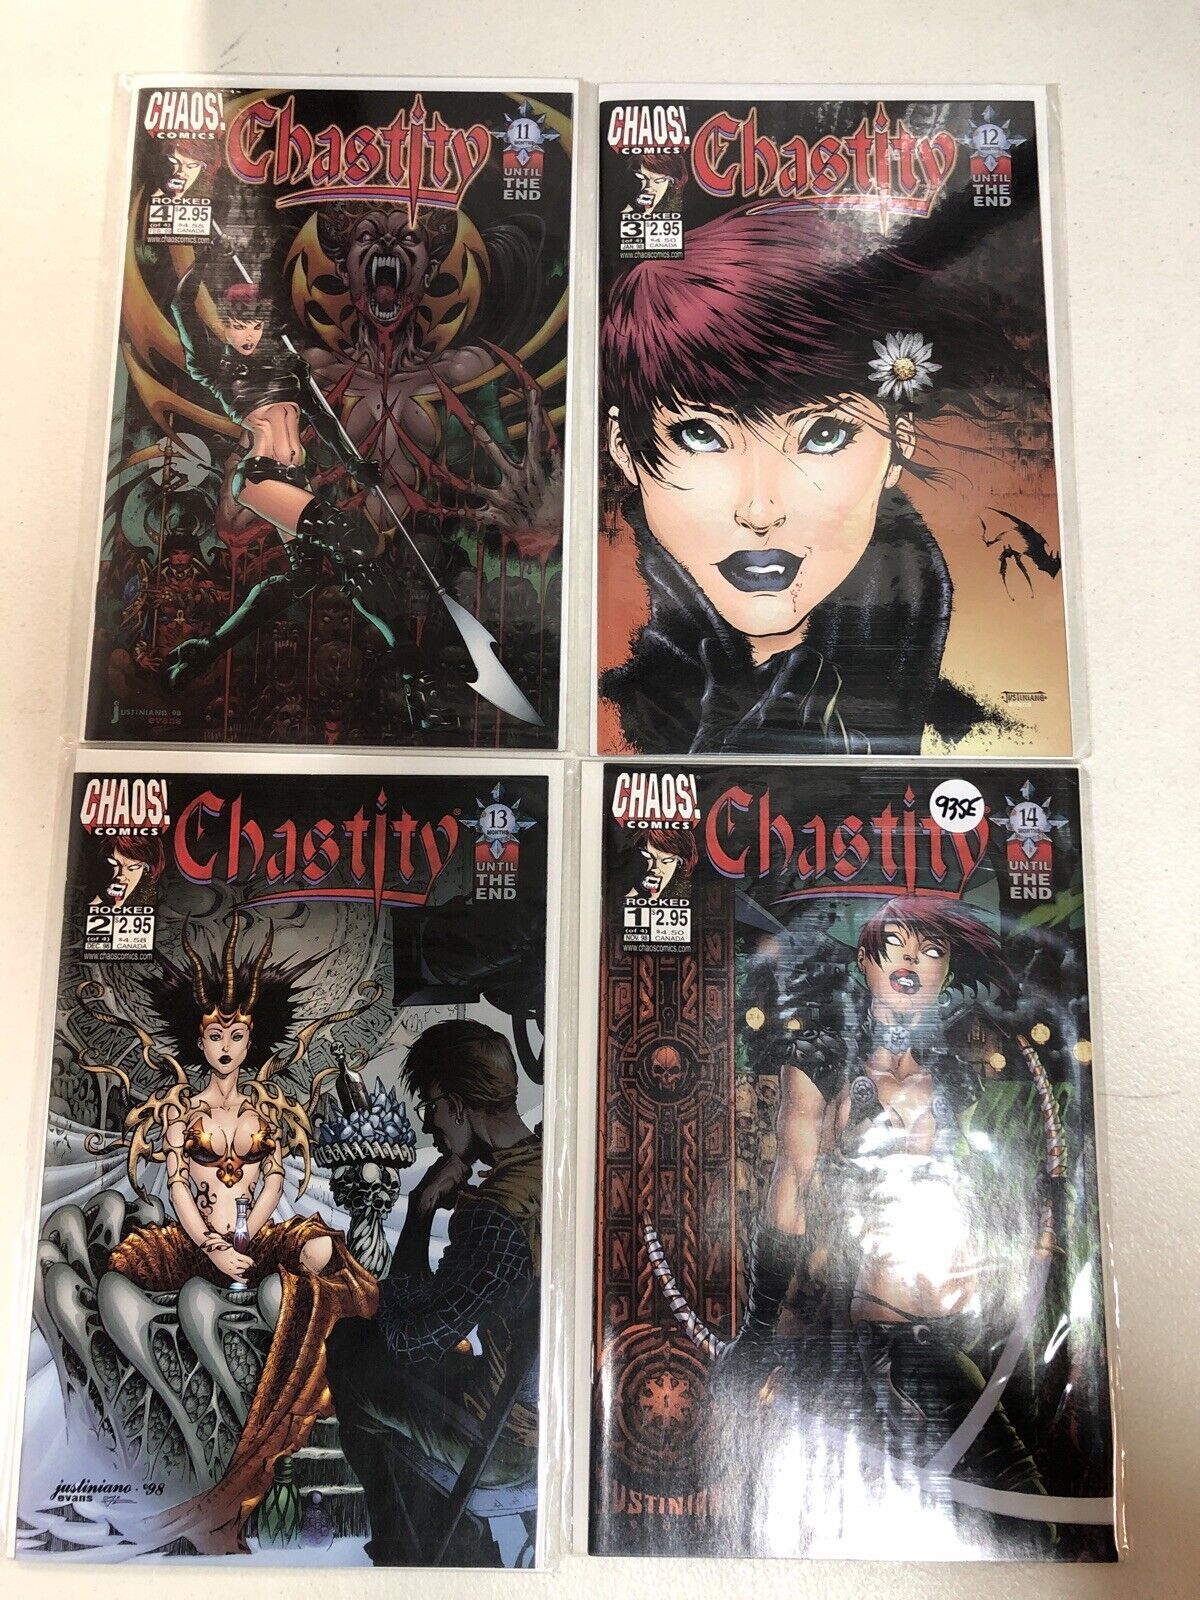 Chasity Rocked (1998) #1 2 3 (VF/NM) Complete Set Justiniano art Chaos